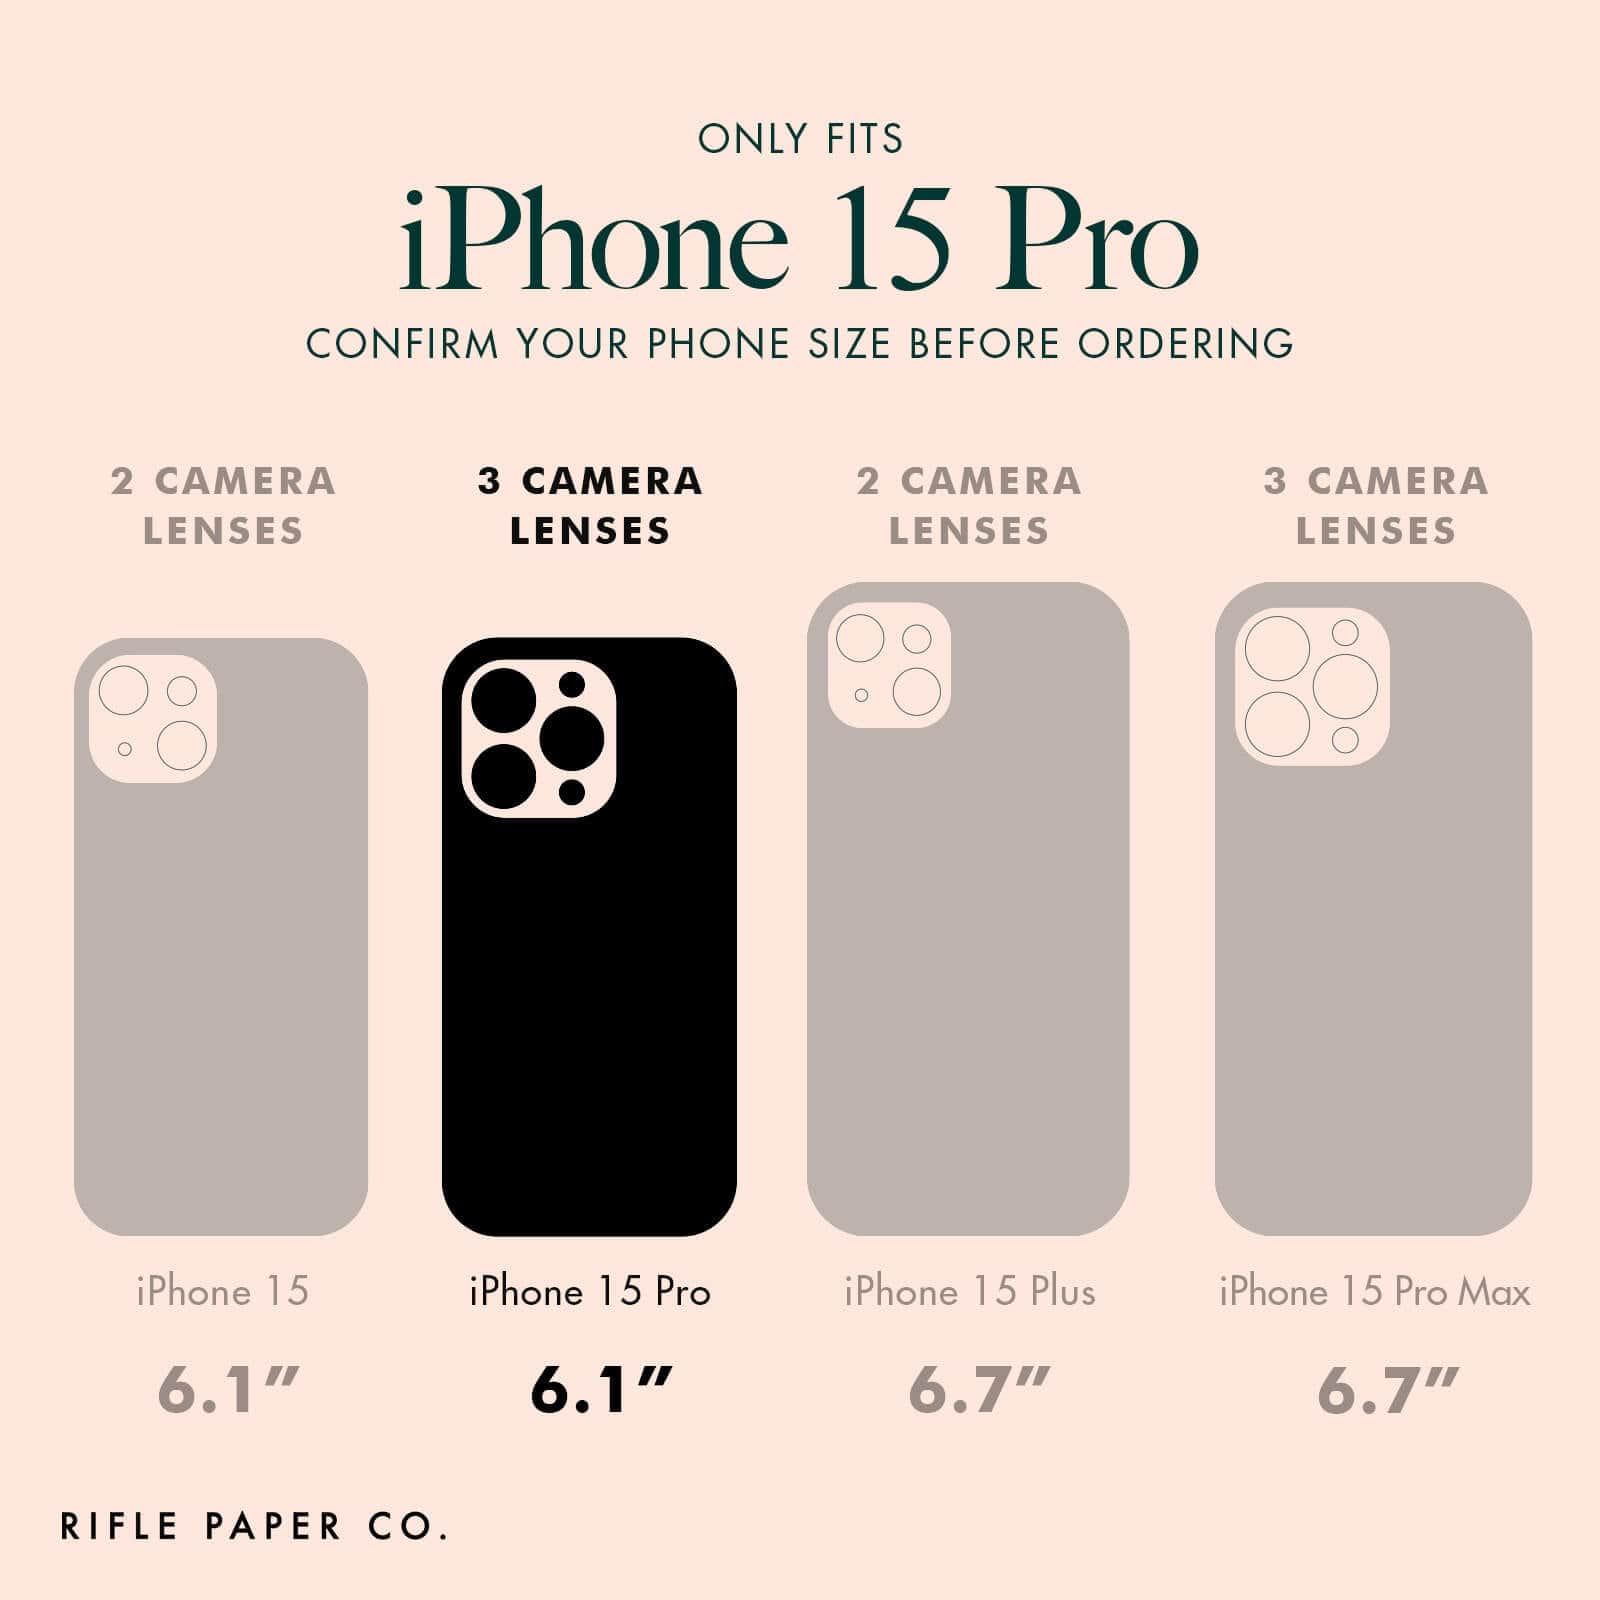 ONLY FITS IPHONE 15 PRO. CONFIRM YOUR PHONE SIZE BEFORE ORDERING